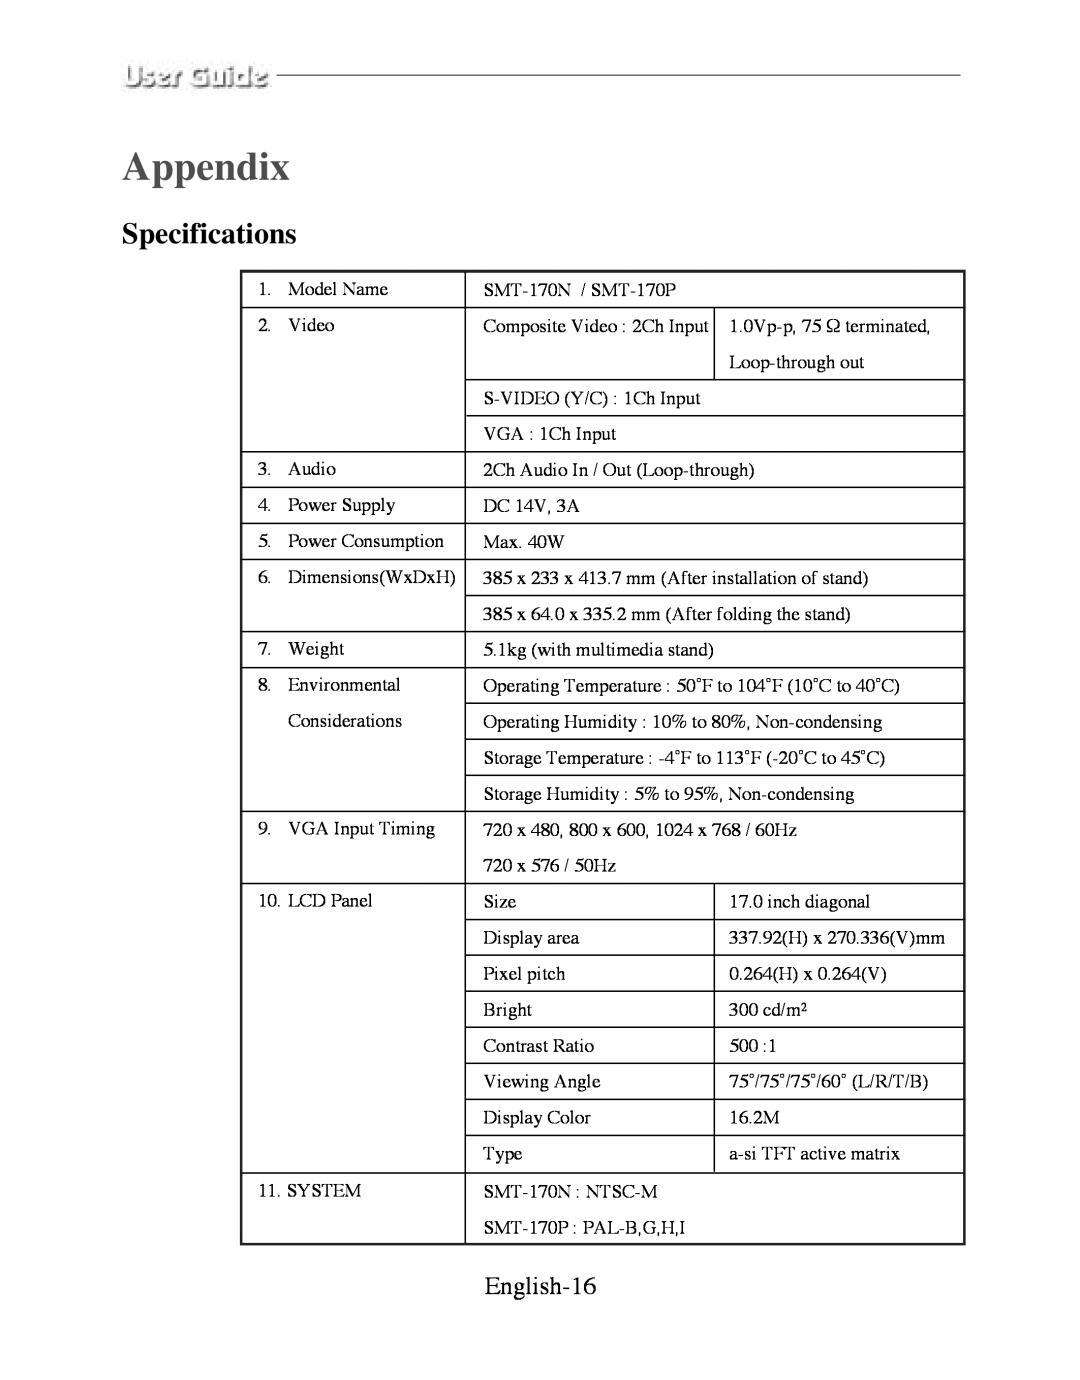 Samsung SMT-170P manual Appendix, Specifications, English-16 